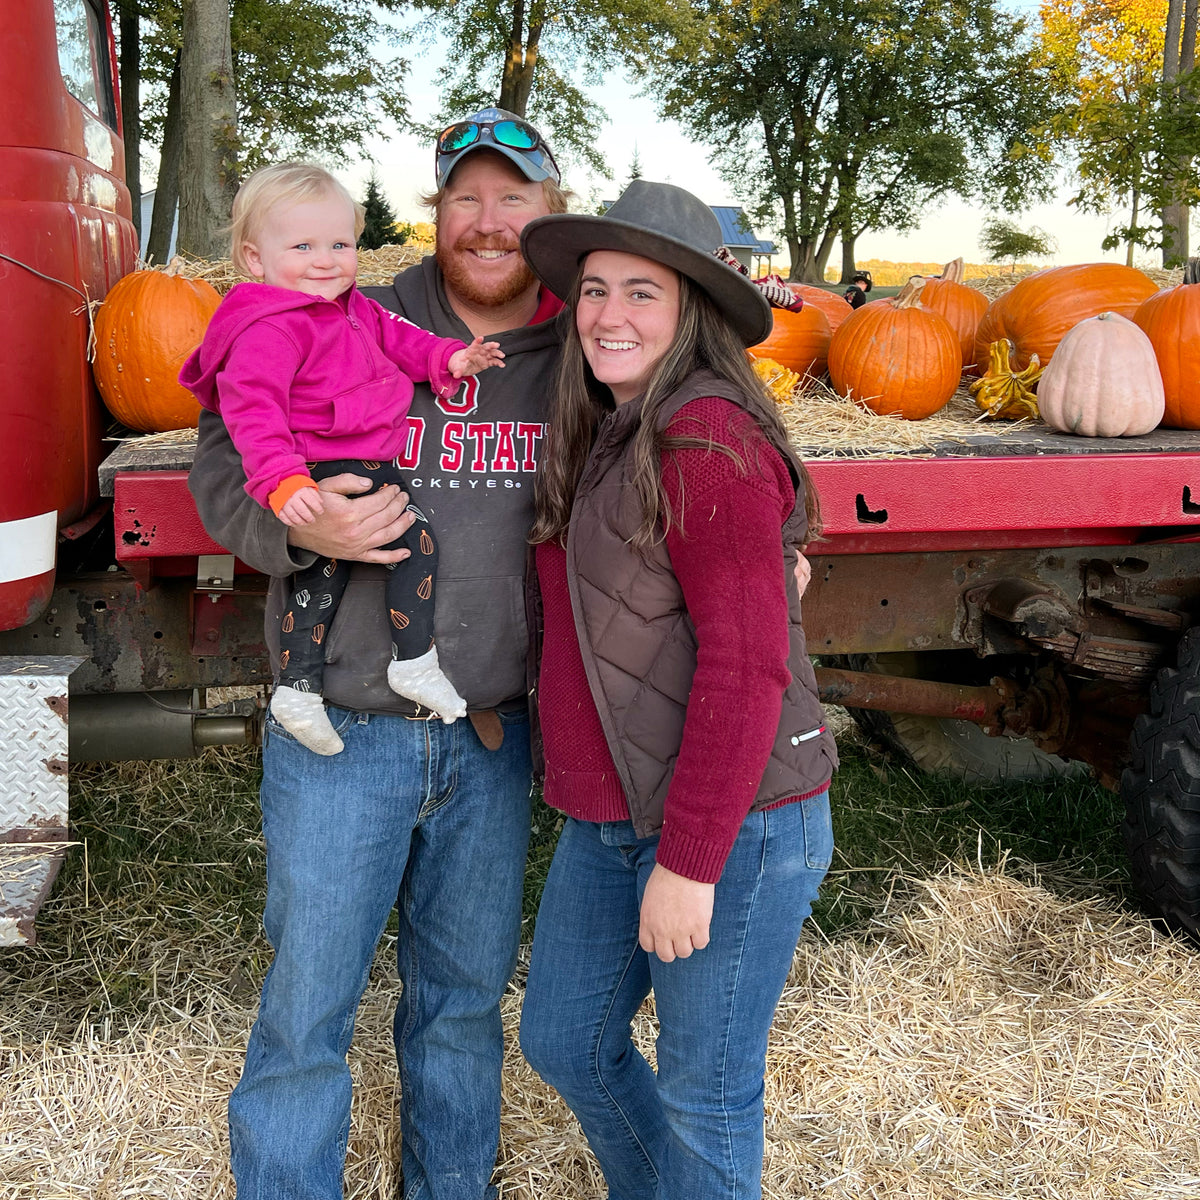 Our Experience at Lehner's Pumpkin Patch